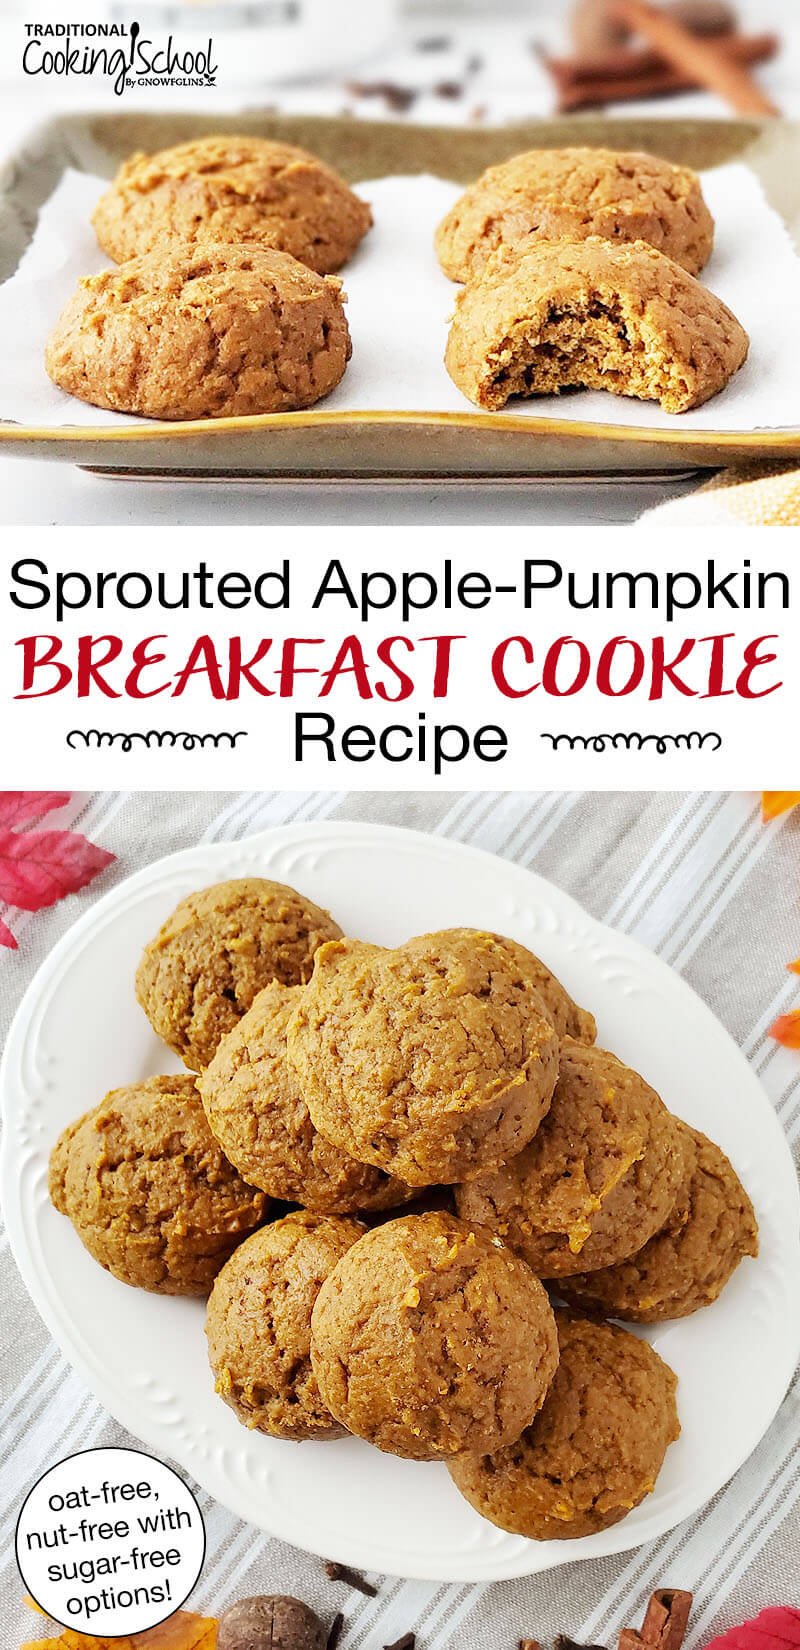 Photo collage of cookies on a baking sheet and a plate. Text overlay says: "Sprouted Apple-Pumpkin Breakfast Cookie Recipe (oat-free, nut-free with sugar-free options)"